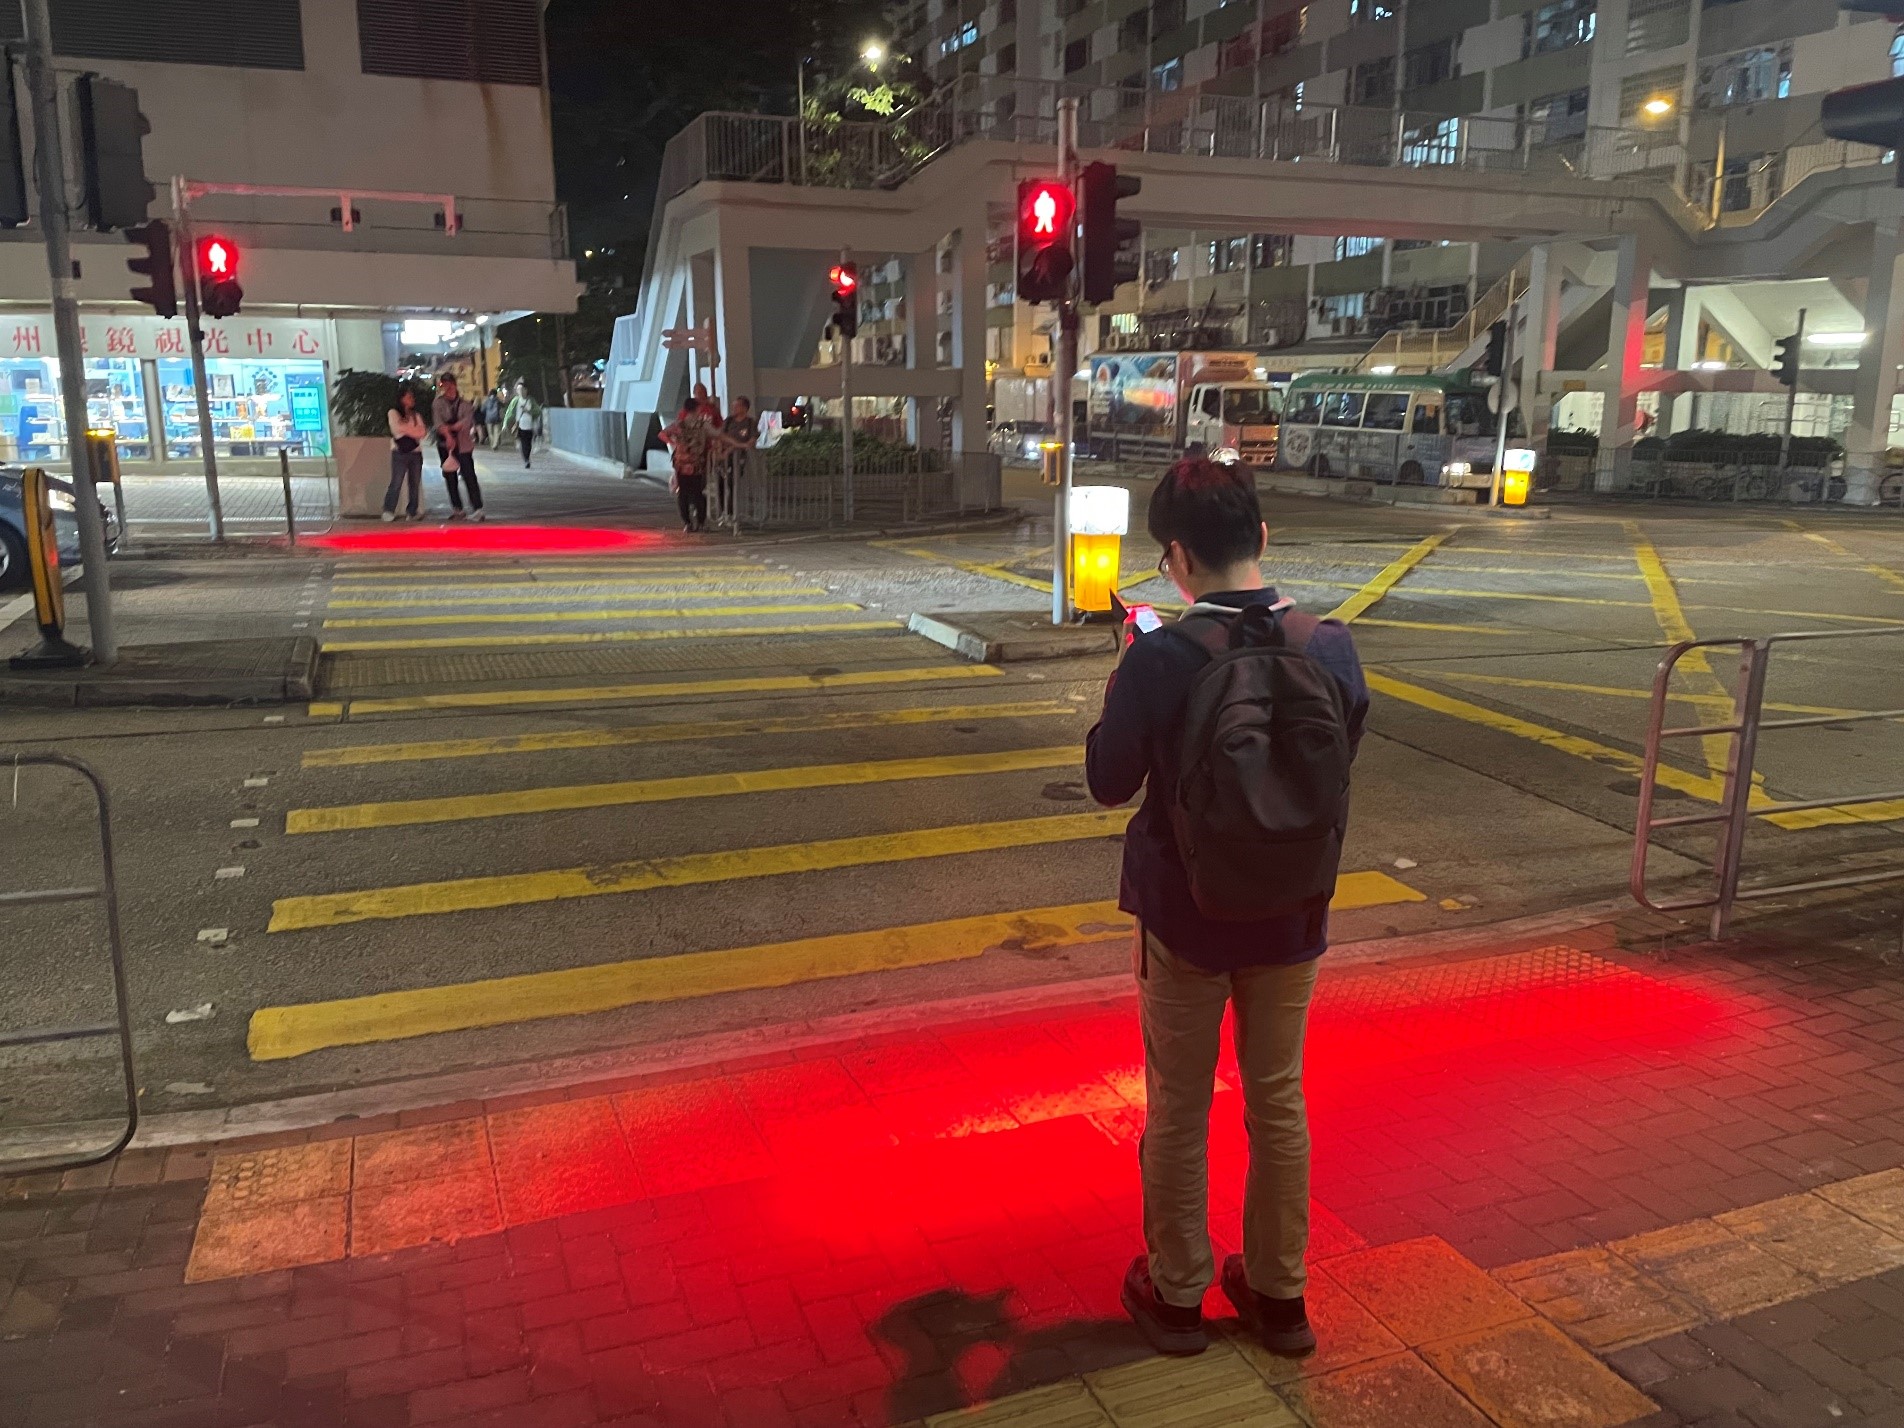 Pedestrian focus on smartphone with red light cast at night